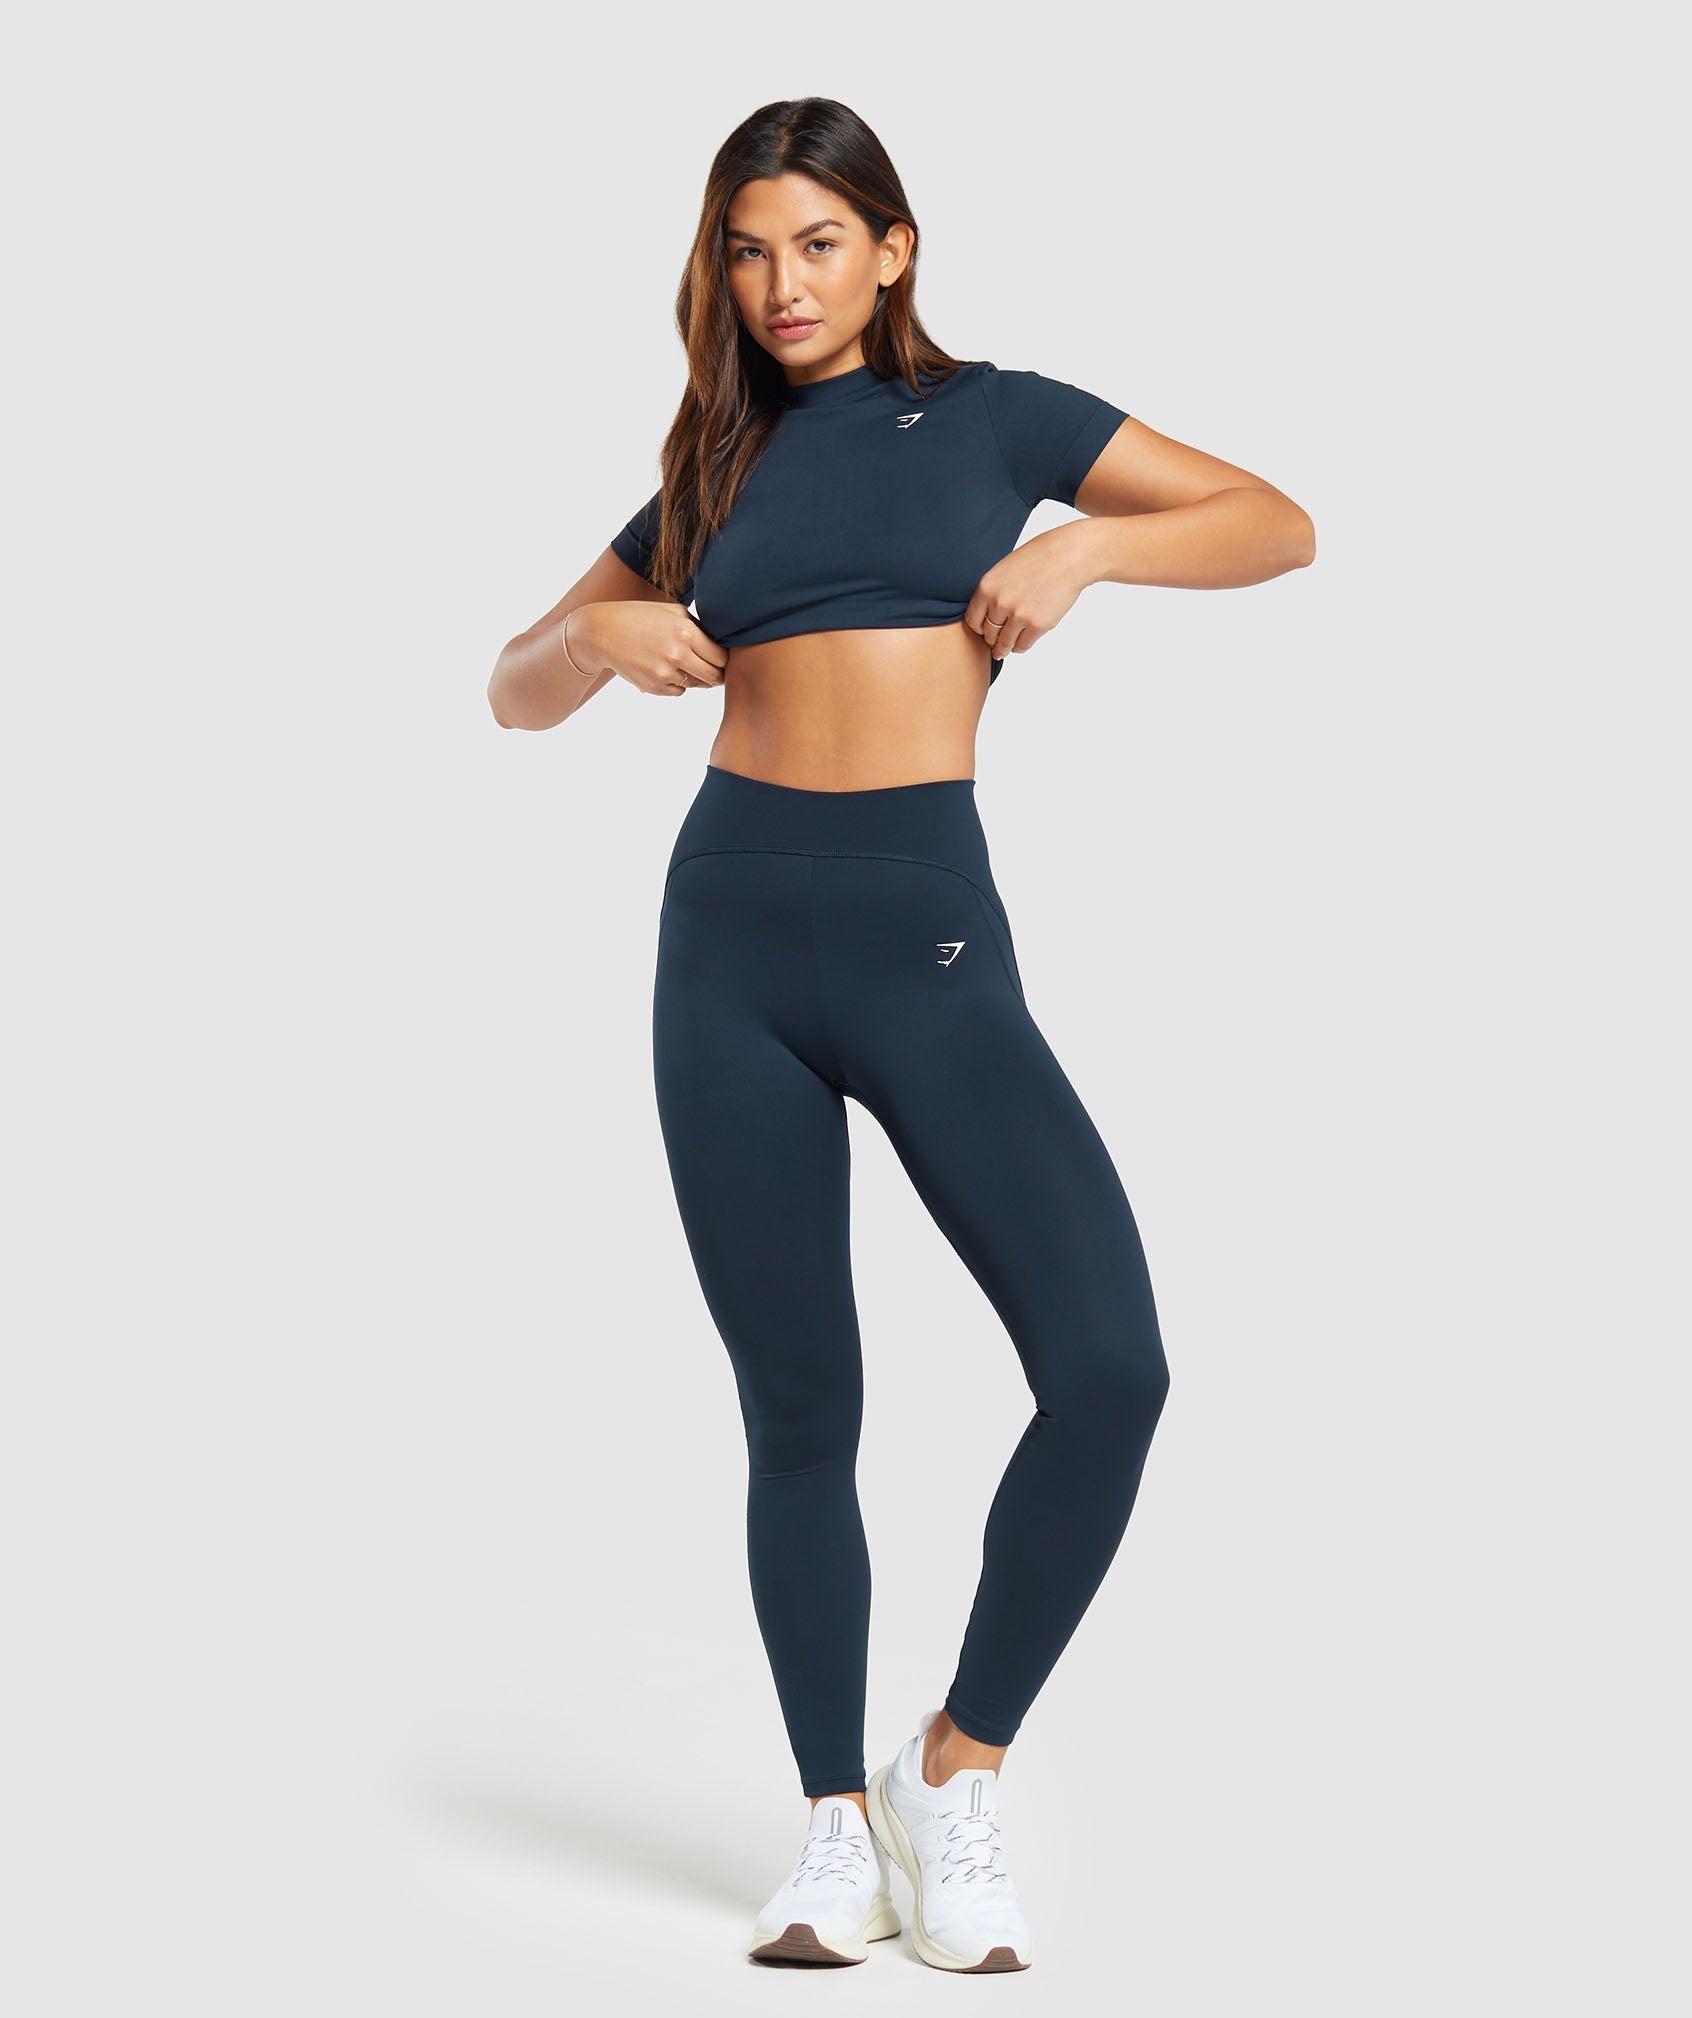 Everyday Seamless Tight Fit Tee in Navy - view 4